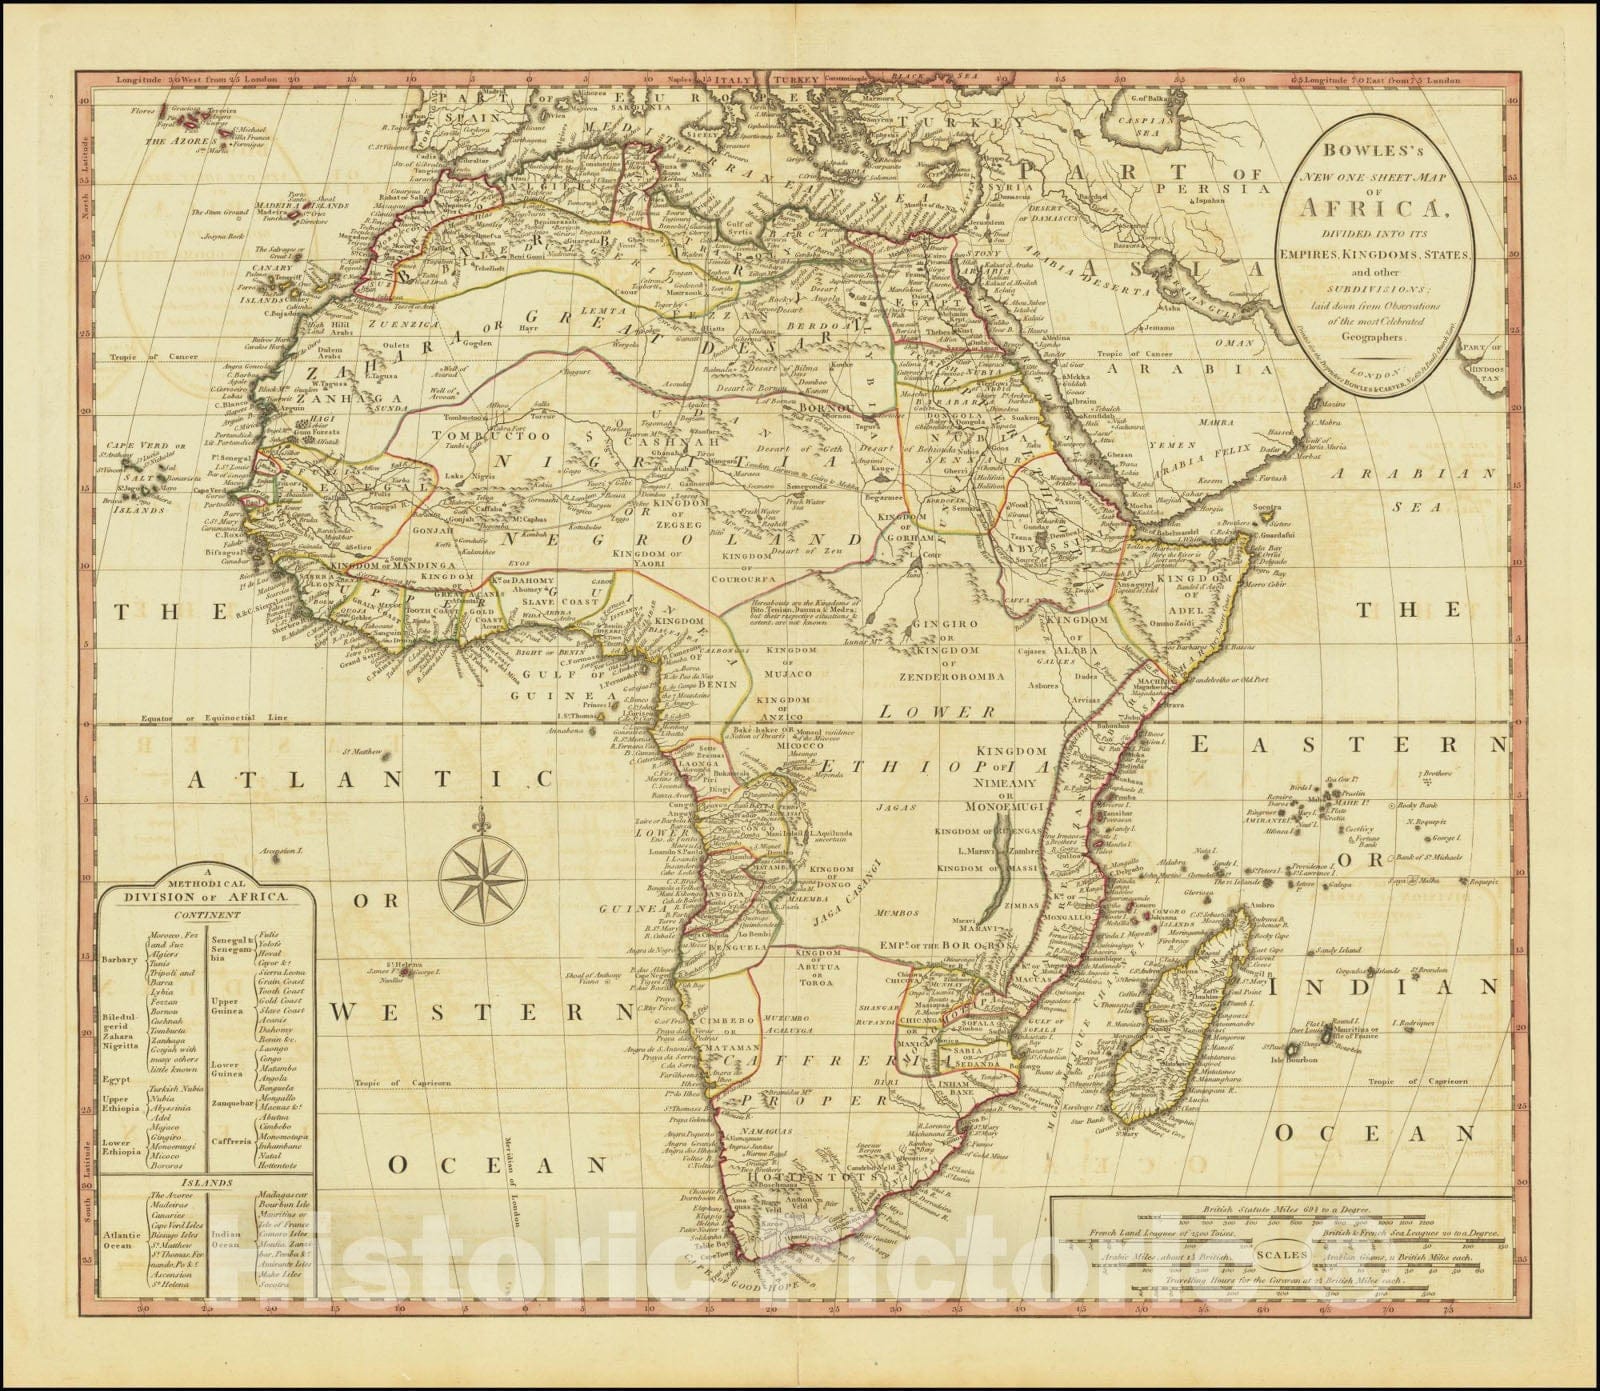 Historic Map : Bowles's New One-Sheet Africa, Divided Into Its Empires, Kingdoms, States, and other Subdivisions; laid down from Observations of the most Celebrated Geographers., 1794, Vintage Wall Art